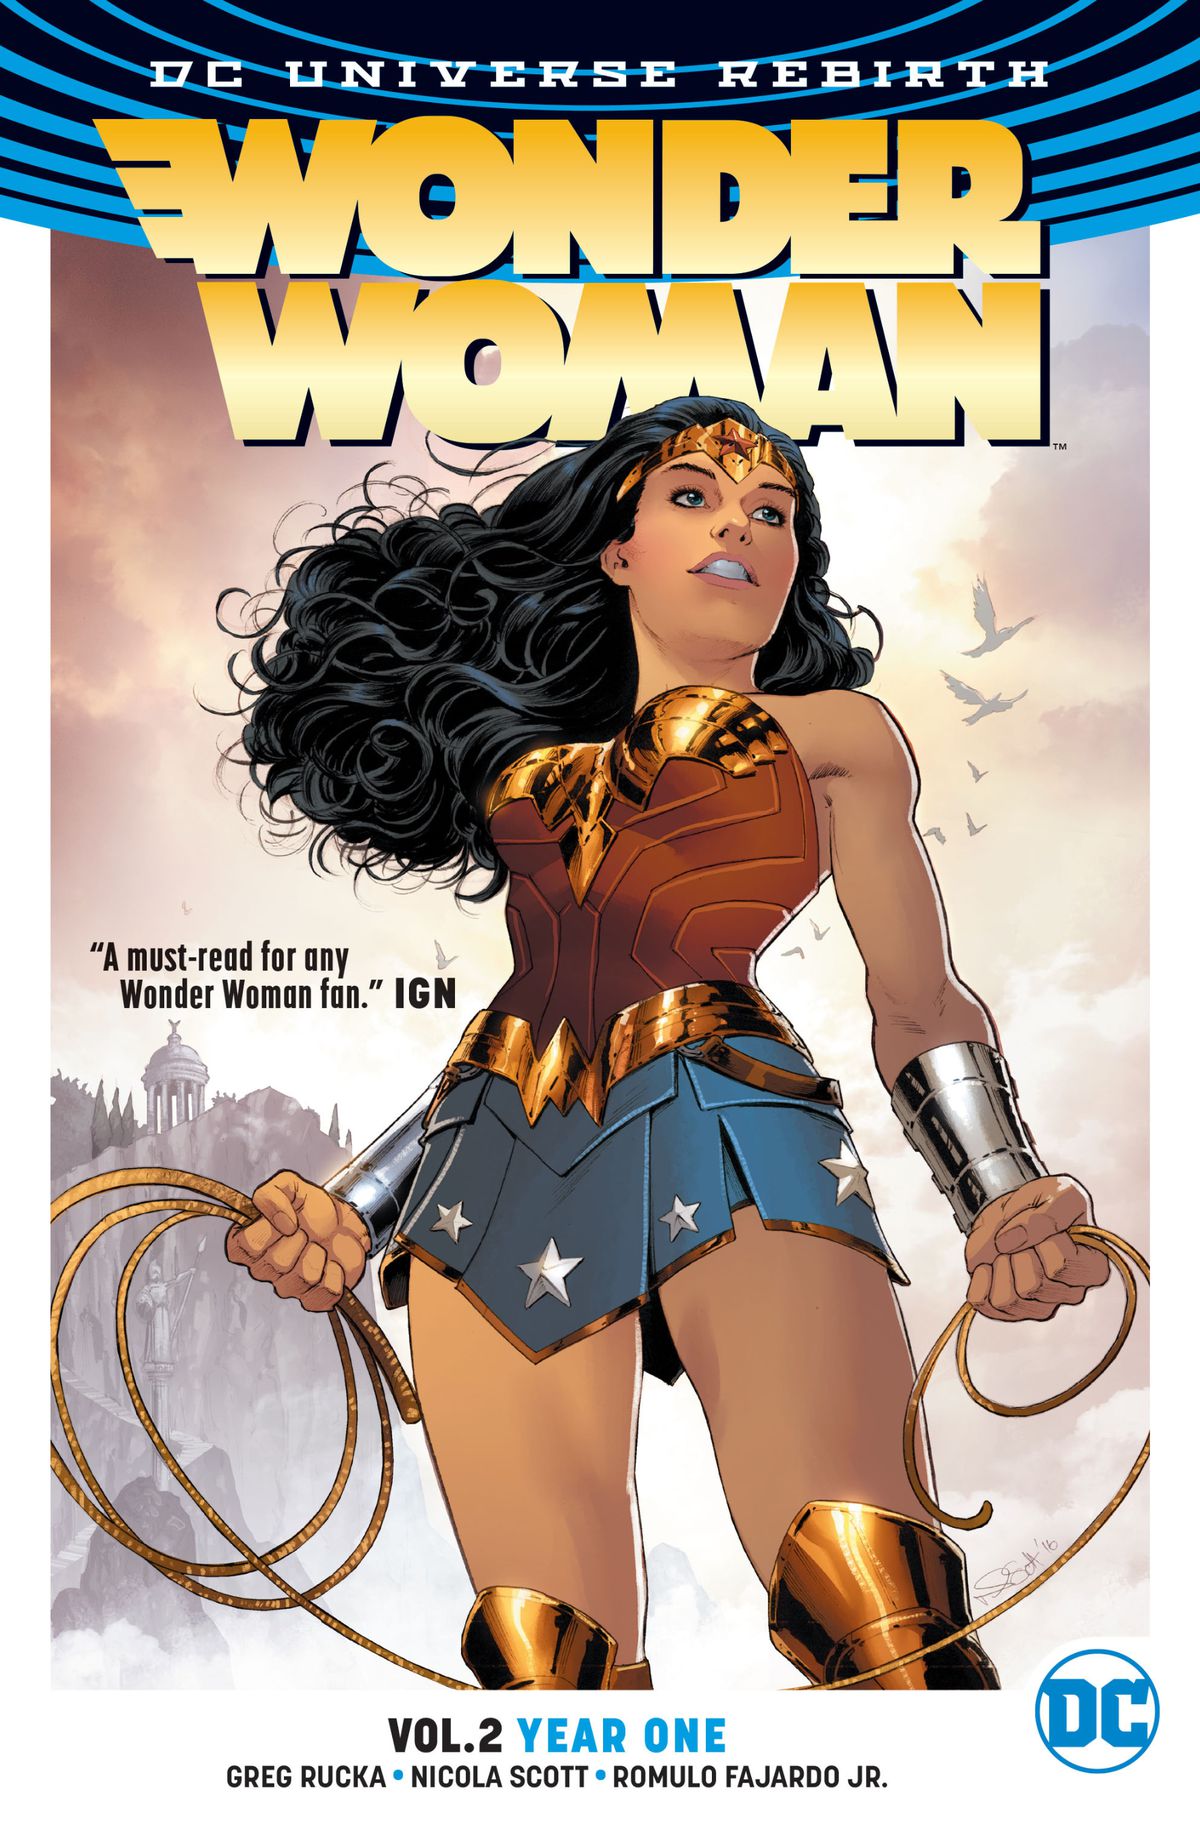 Wonder Woman stands triumphantly on Themyscira with her golden lasso on the cover of Wonder Woman: Year One.